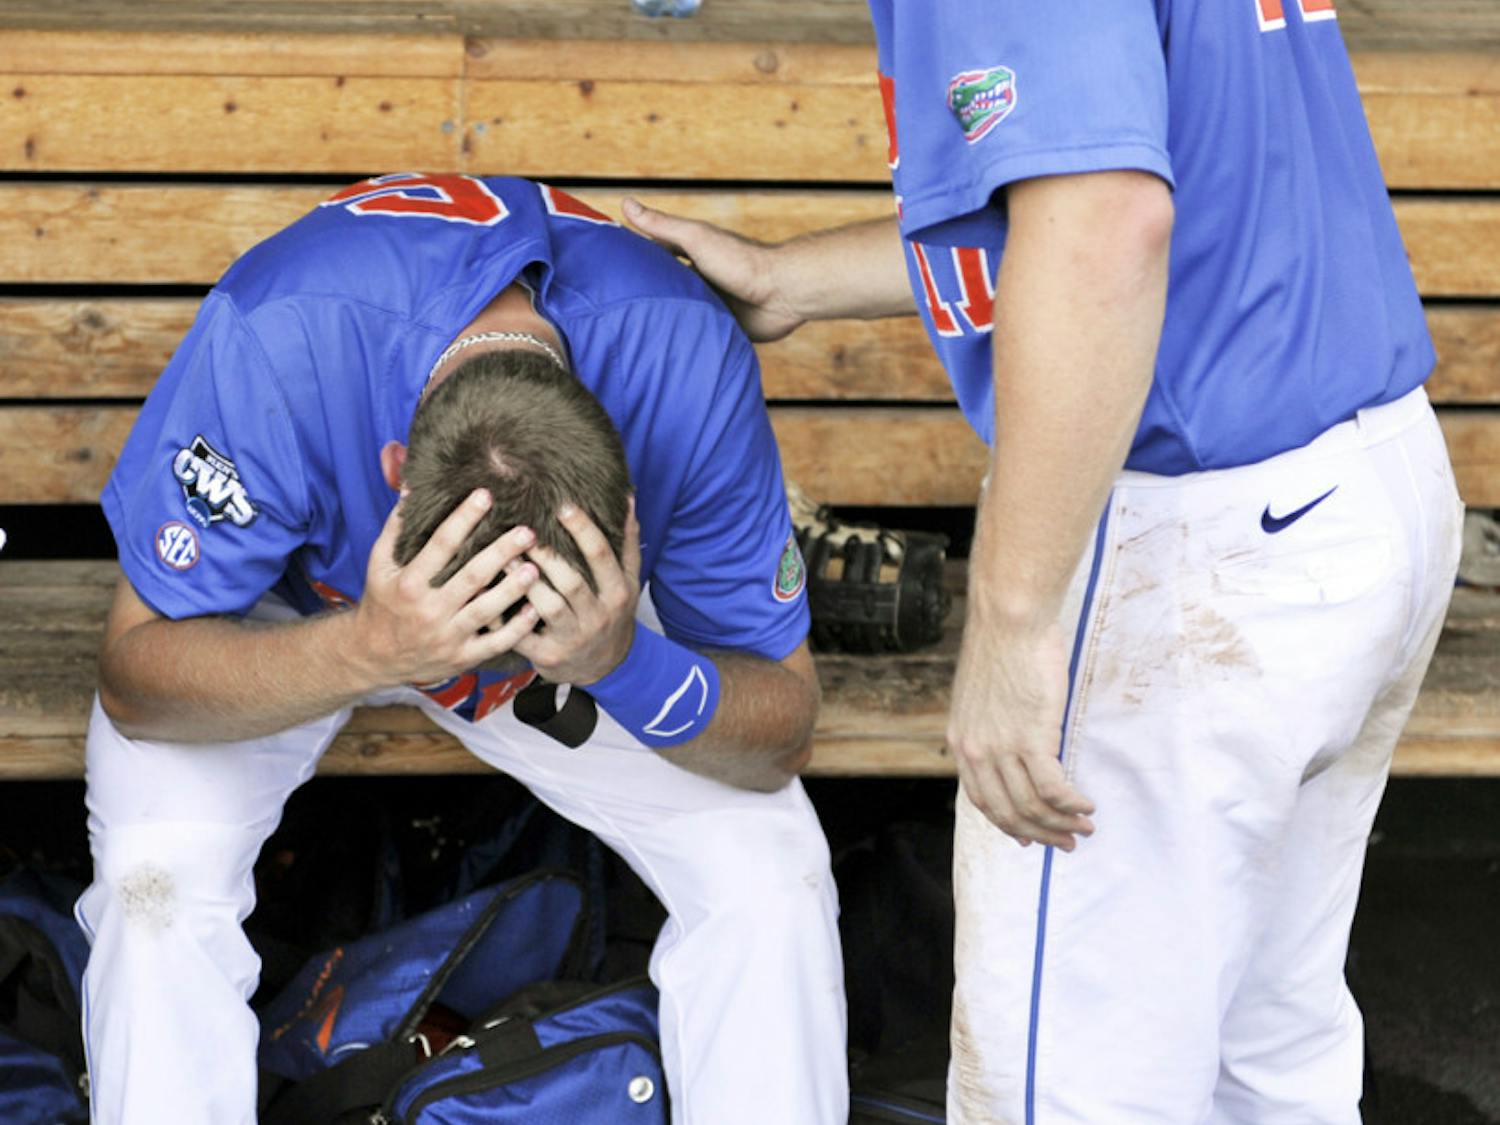 Florida left fielder Justin Shafer (left) is consoled in the dugout by teammate Taylor Gushue after being eliminated from the College World Series on Monday.